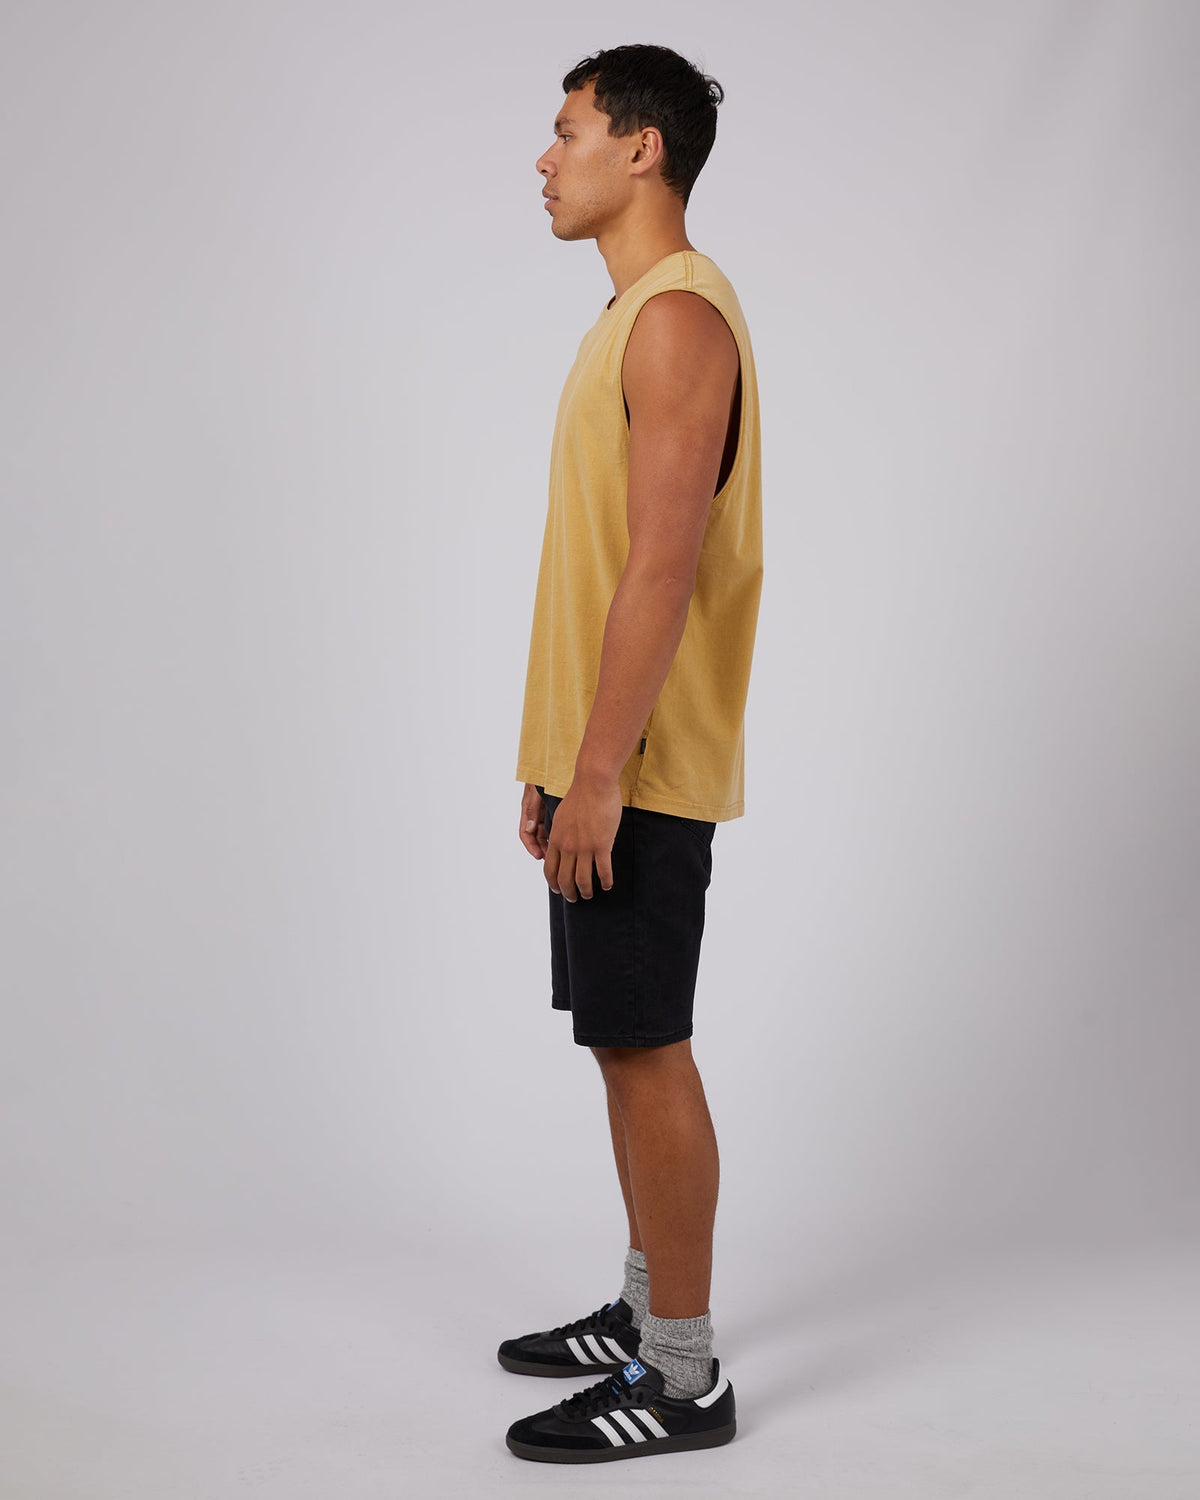 Silent Theory-Standard Fit Muscle Mustard-Edge Clothing